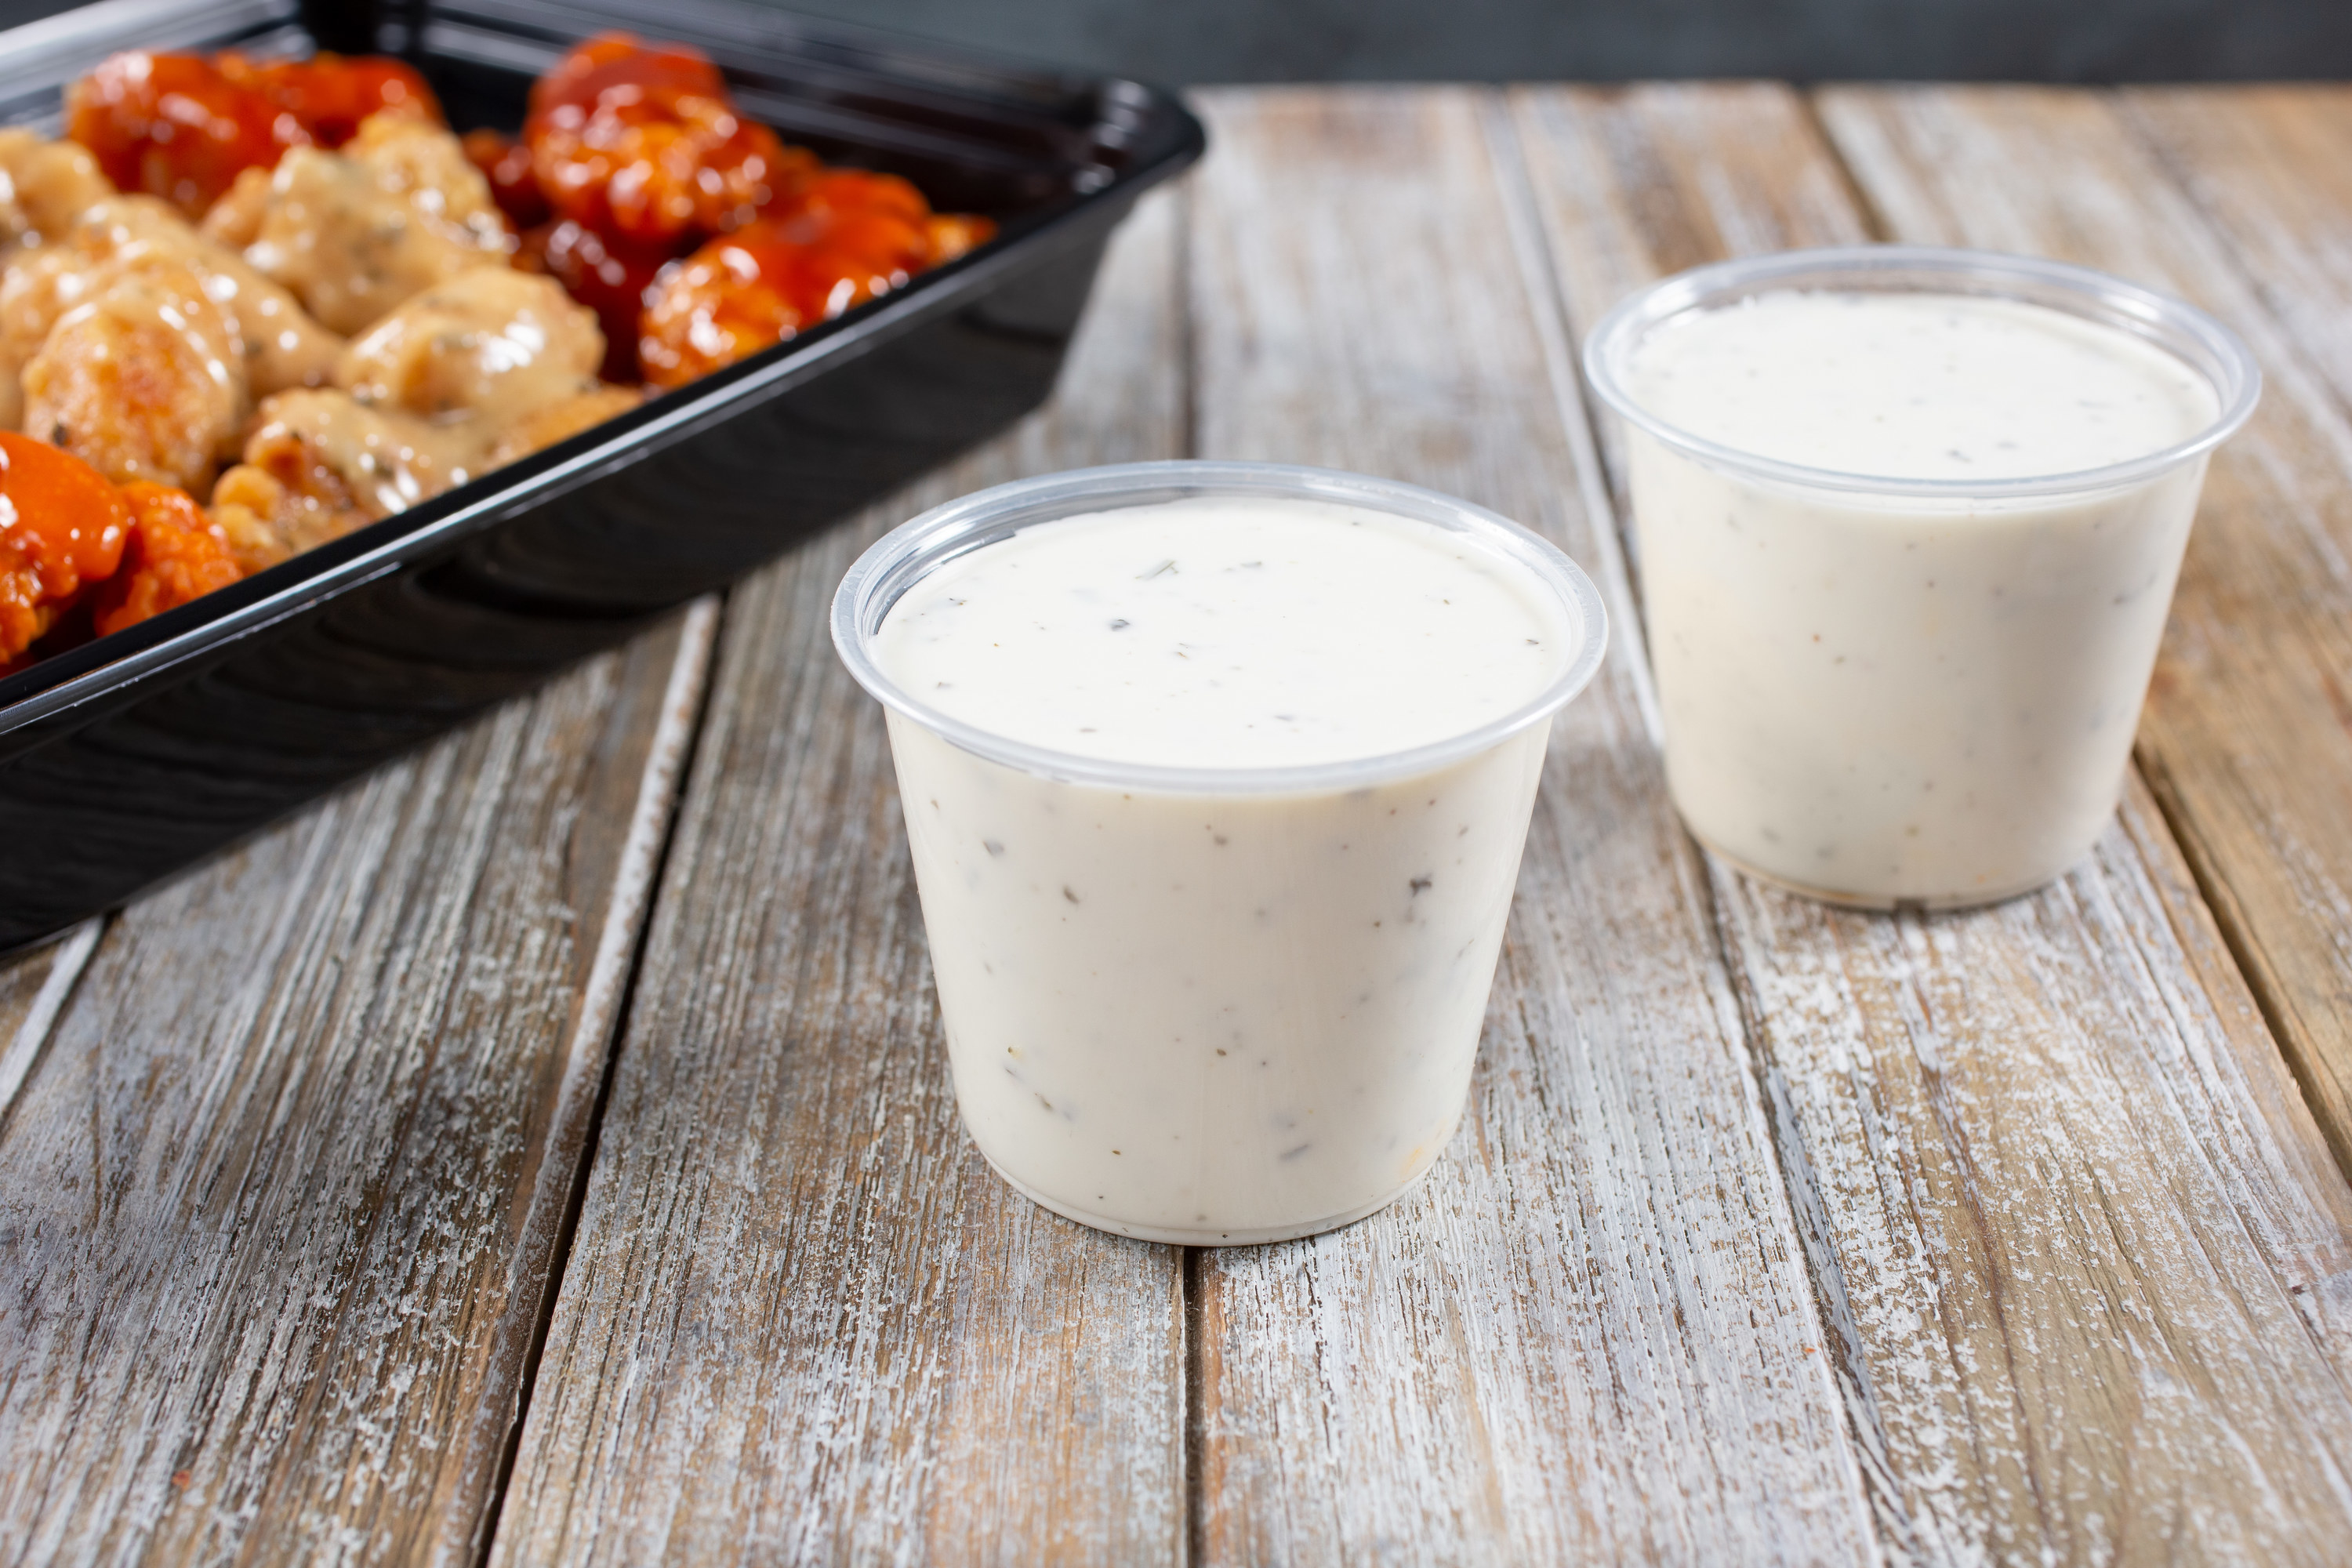 Ranch dipping sauces